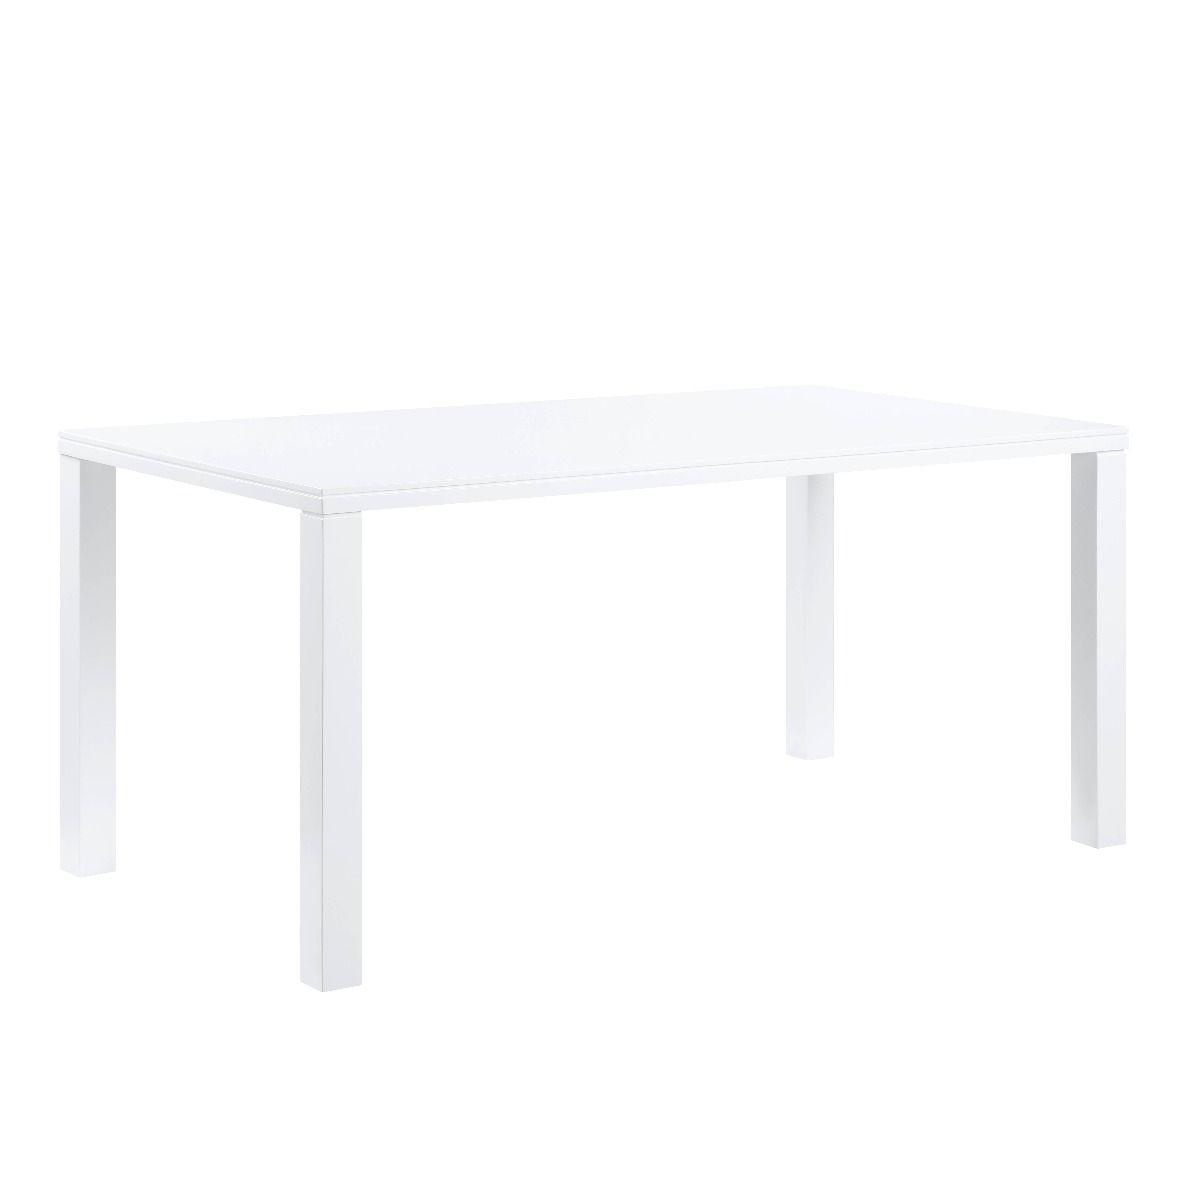 ACME - Pagan - Dining Table - White High Gloss Finish - 5th Avenue Furniture